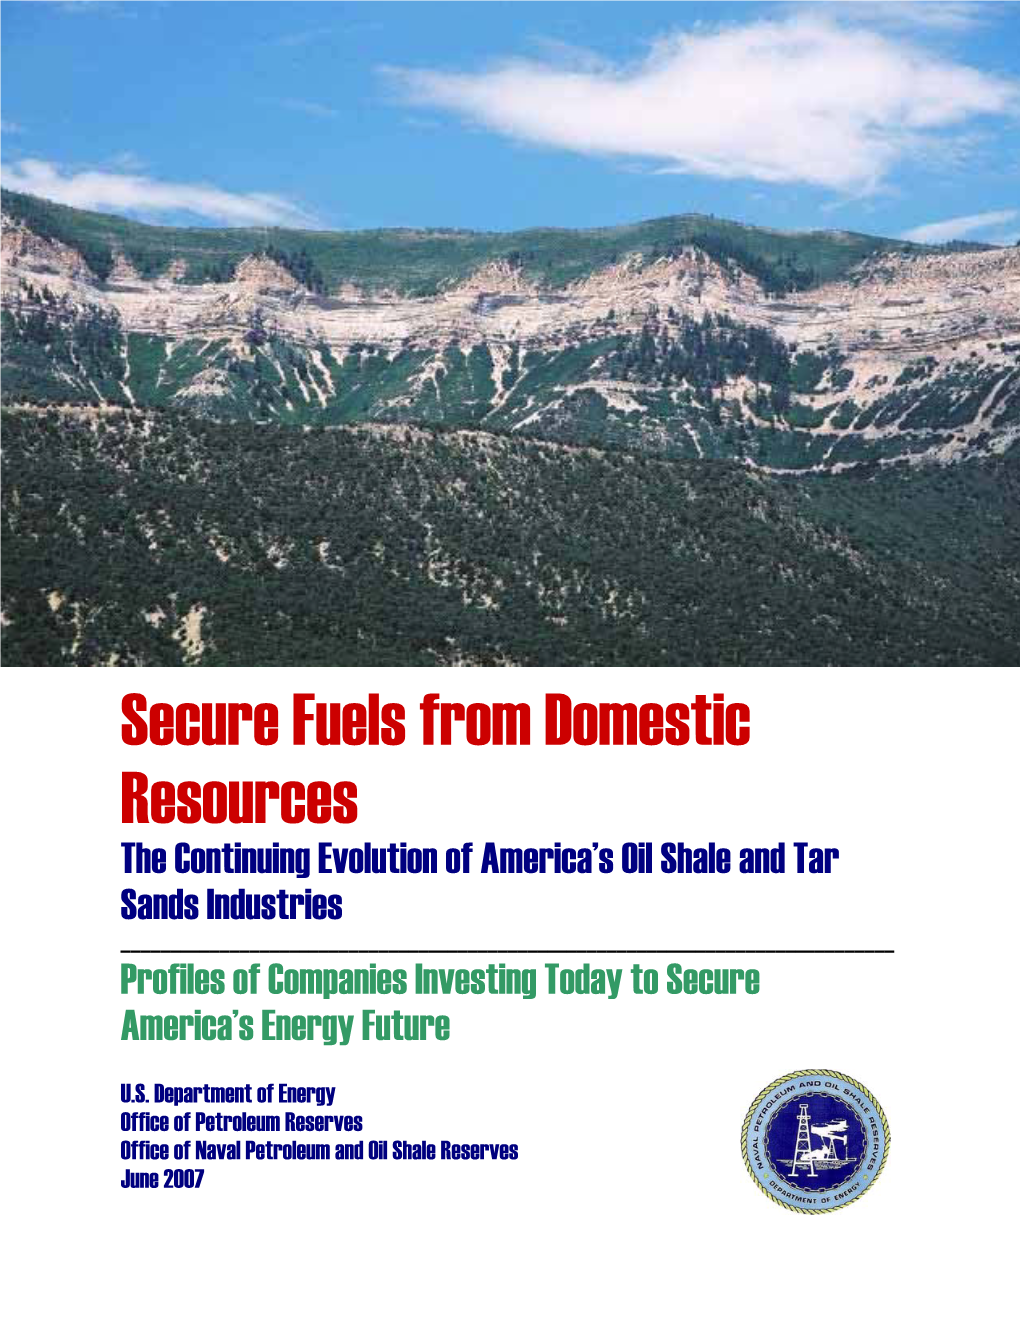 Secure Fuels from Domestic Resources